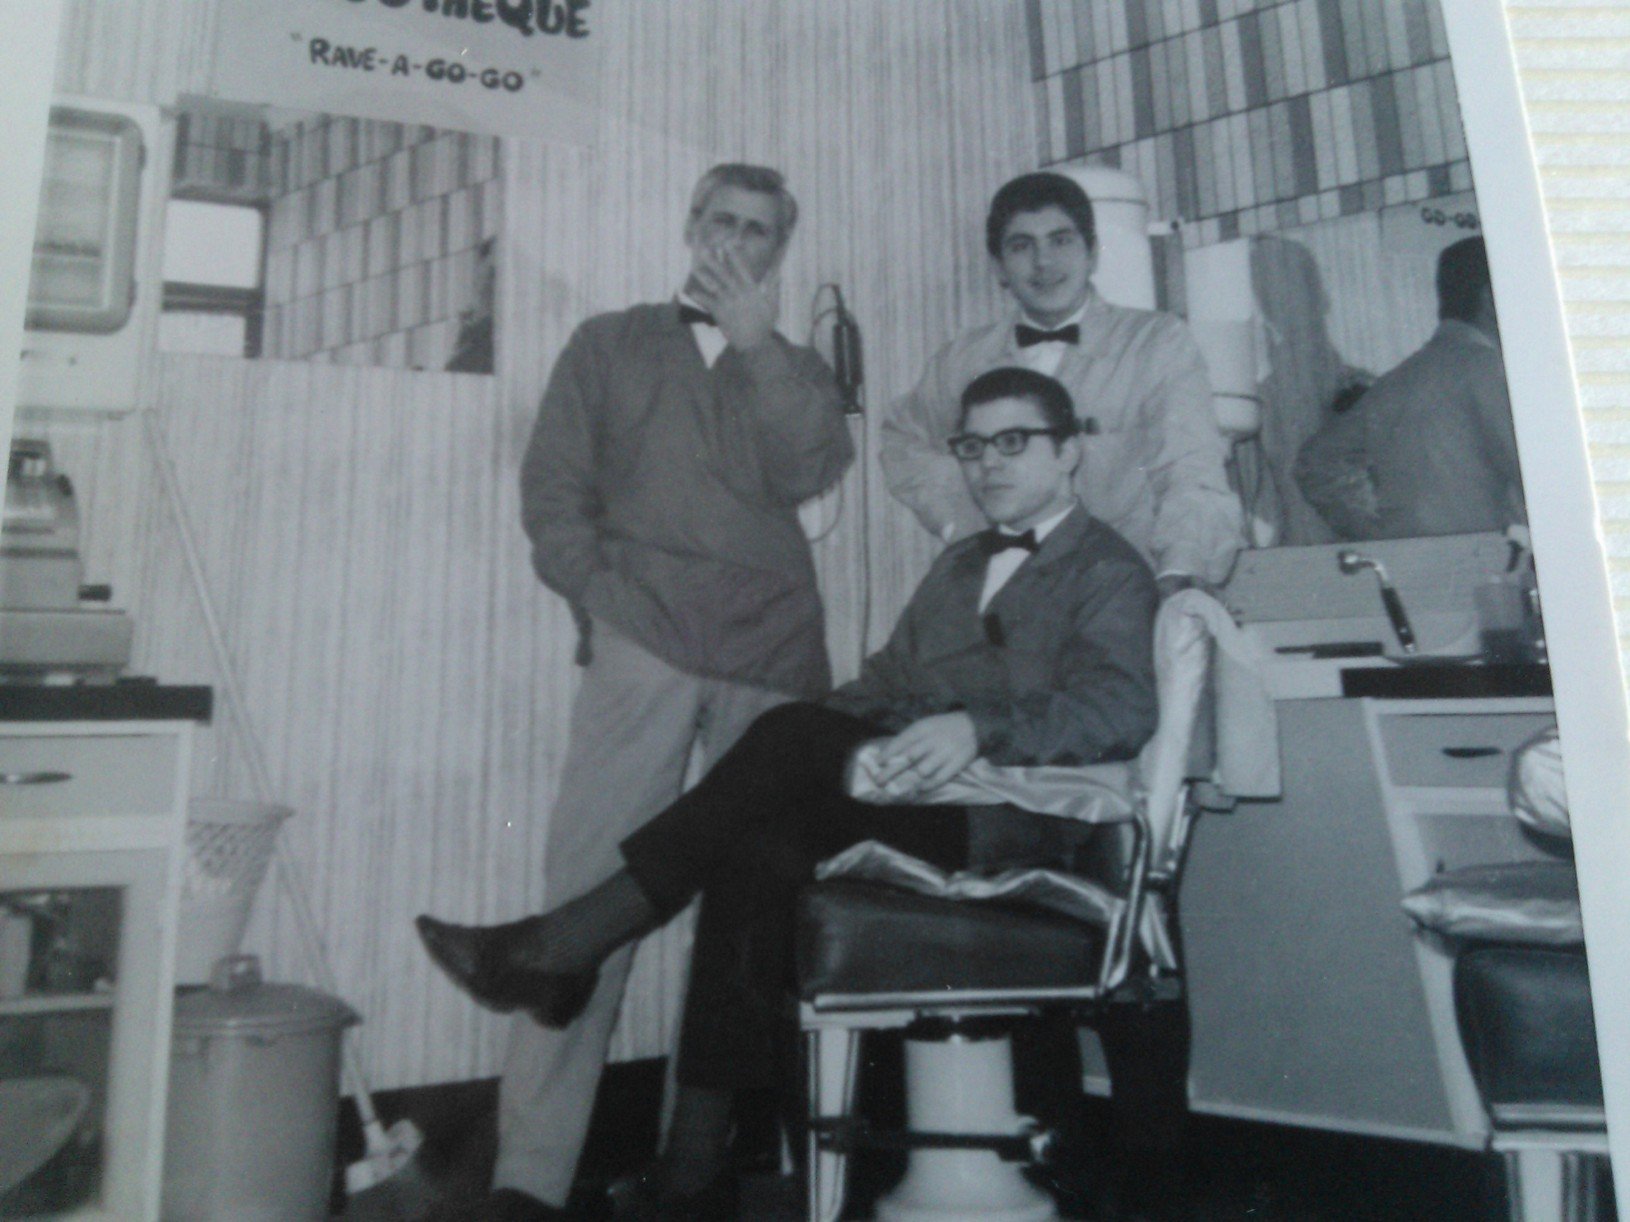 Gino Scumaci with his father and colleague on his first day on the job.